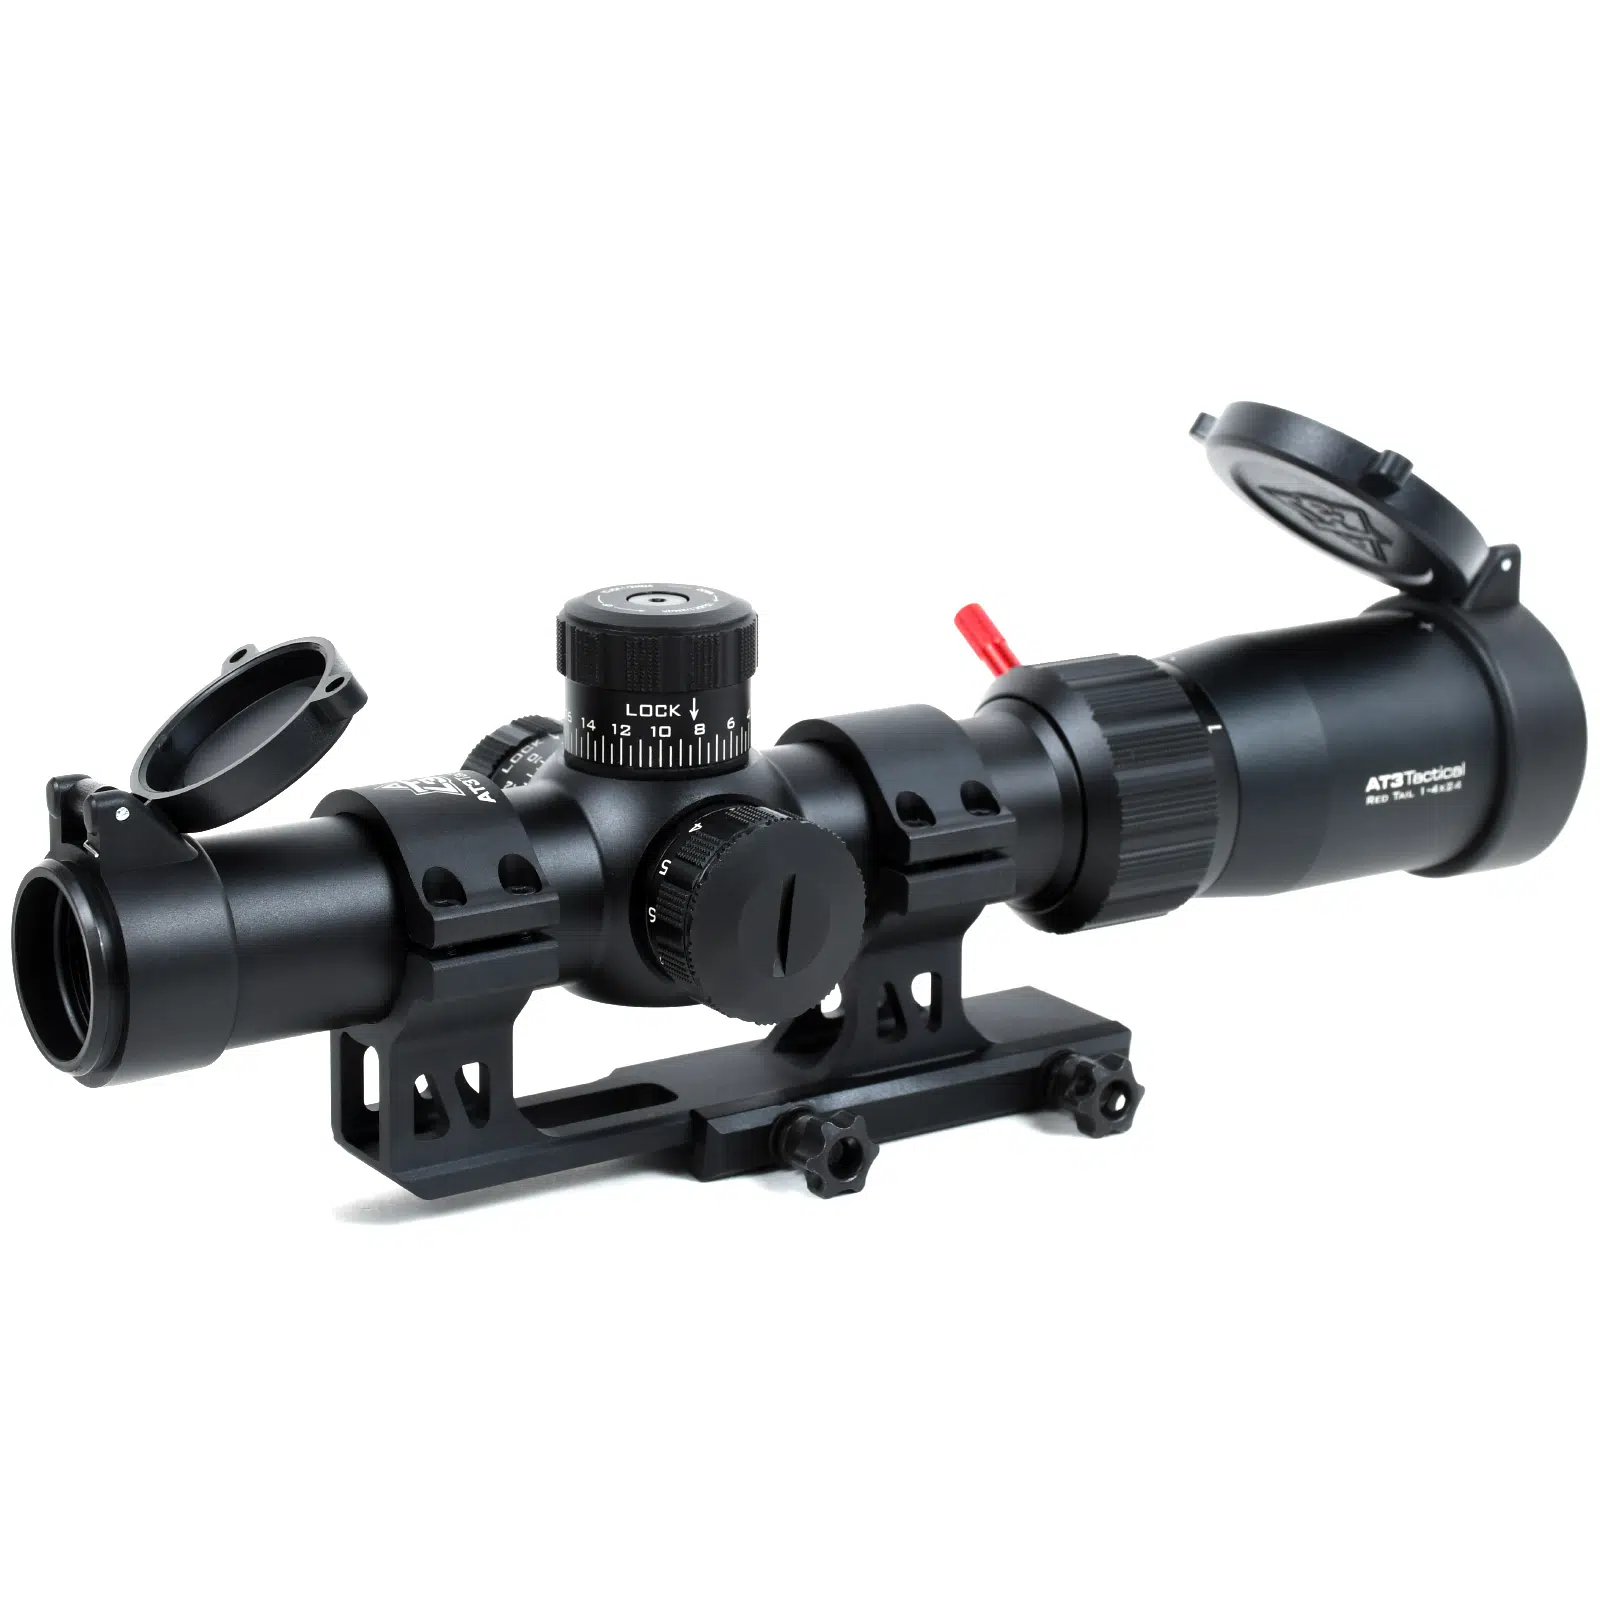 AT3™ Red Tail™ Rifle Scope with Locking Caps - 1-4x or 1-6x Magnification - BDC Reticle